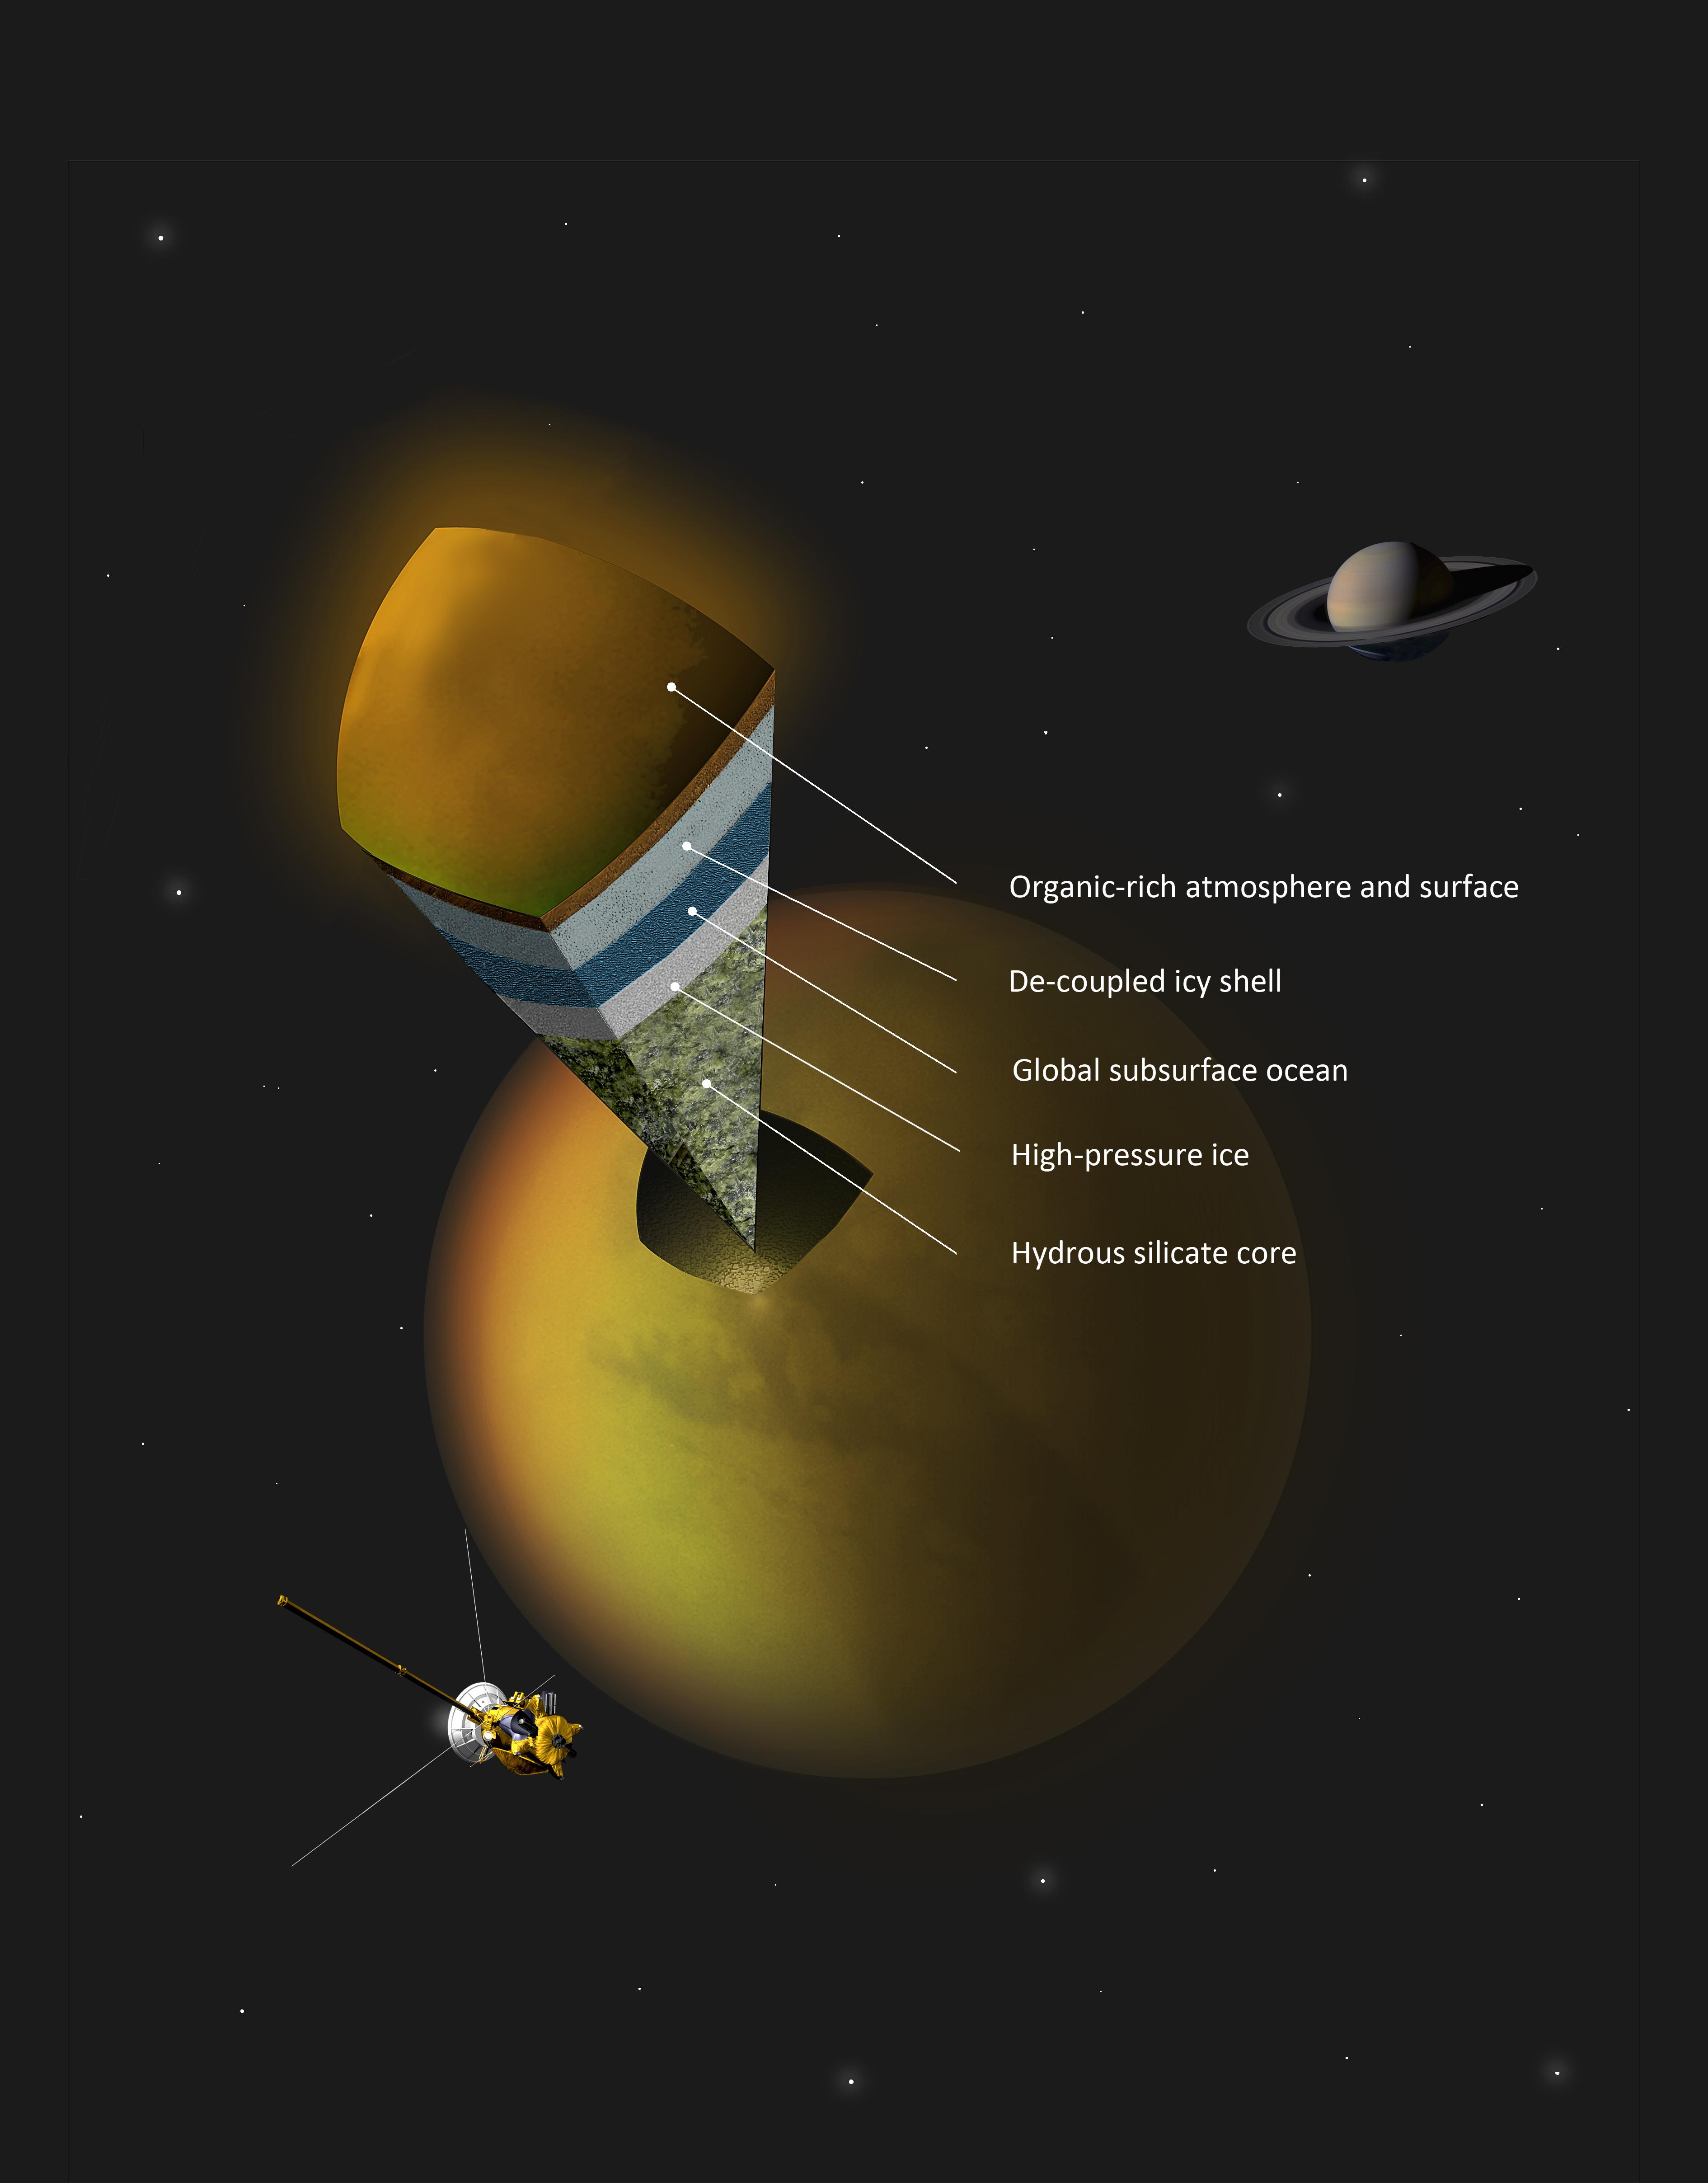 This artist’s concept shows a possible scenario for the internal structure of Titan, as suggested by data from NASA’s Cassini spacecraft.